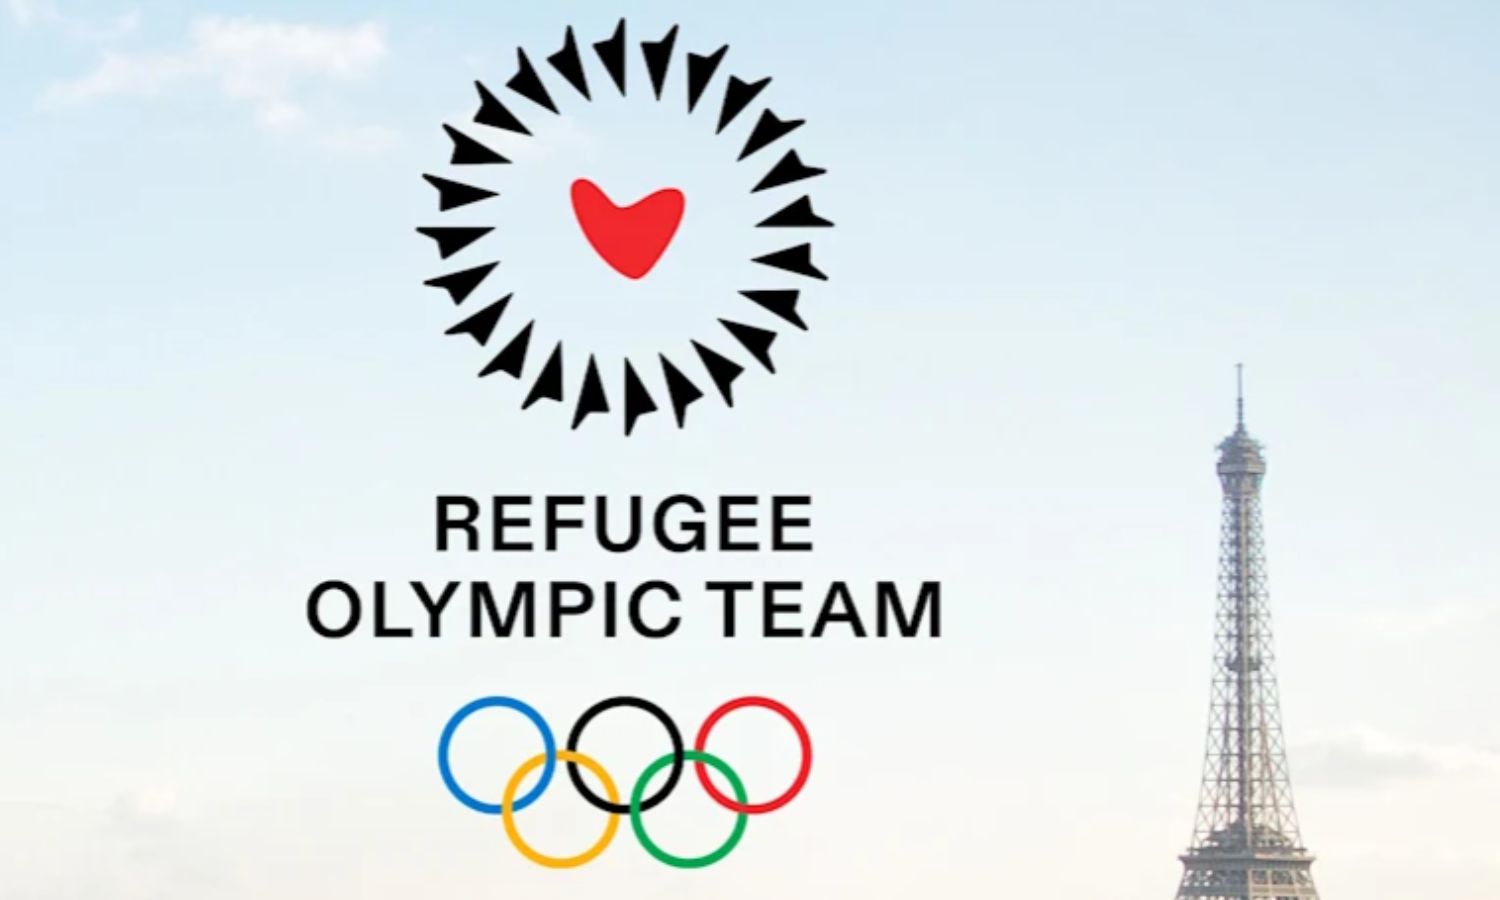 IOC announces 36-member Refugee Olympic team to represent displaced people